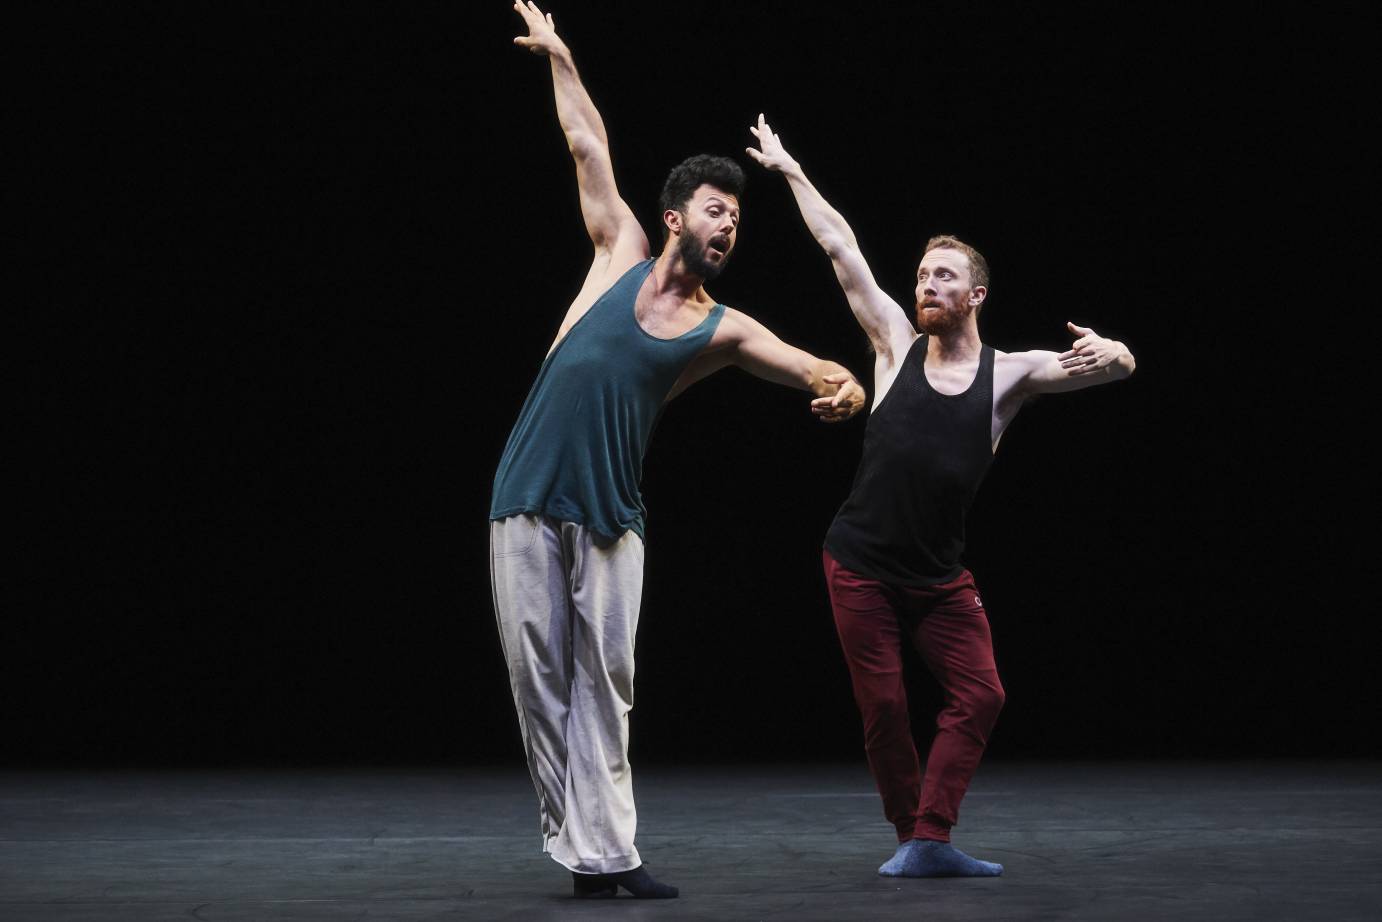 Two male dancers lift their arms and twist their bodies